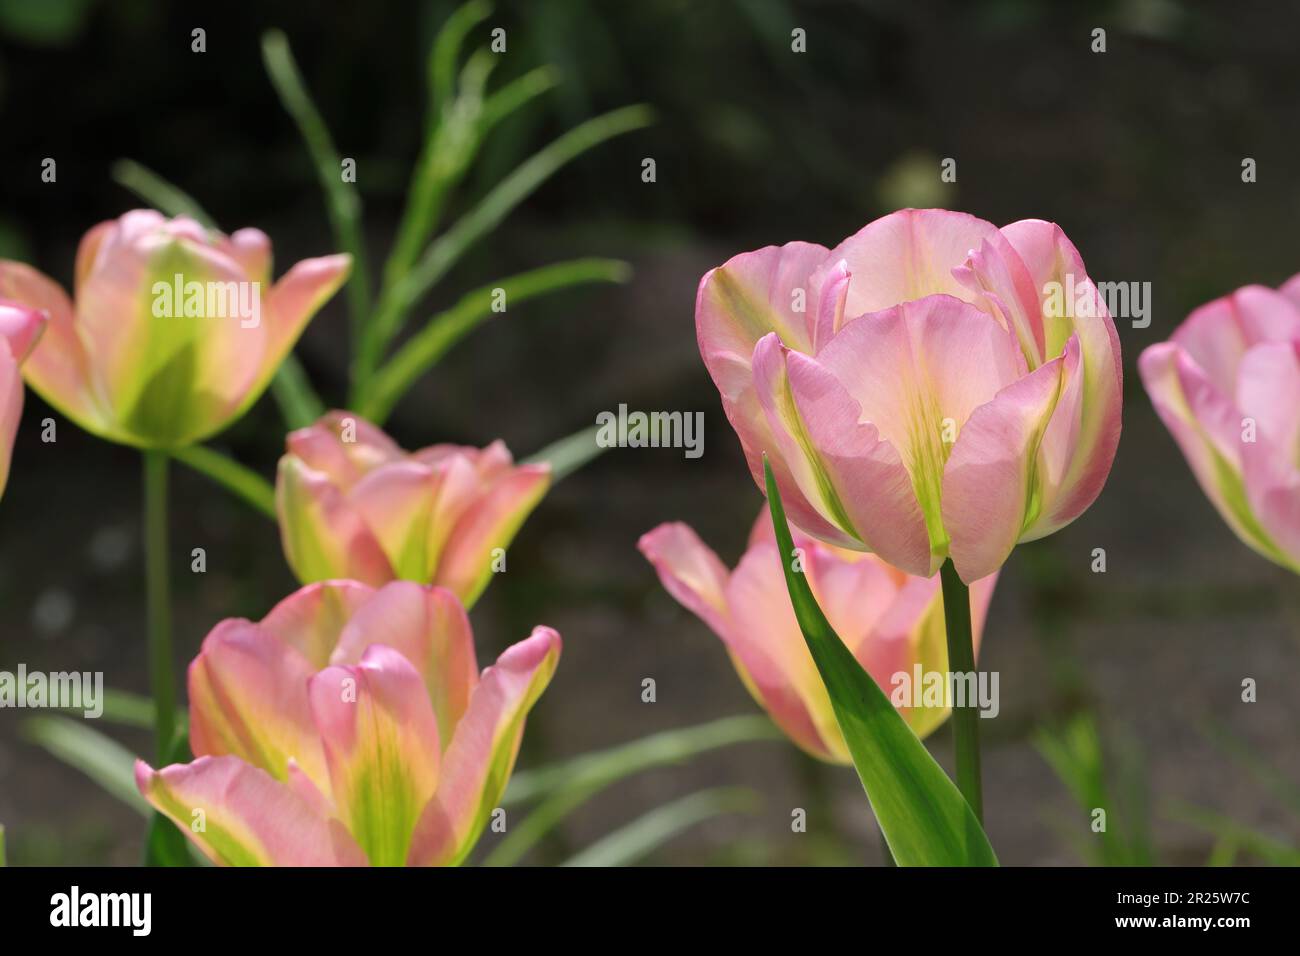 beautiful green and pink colored viridiflora tulips bloom in a garden bed, side view, close-up, selective focus Stock Photo